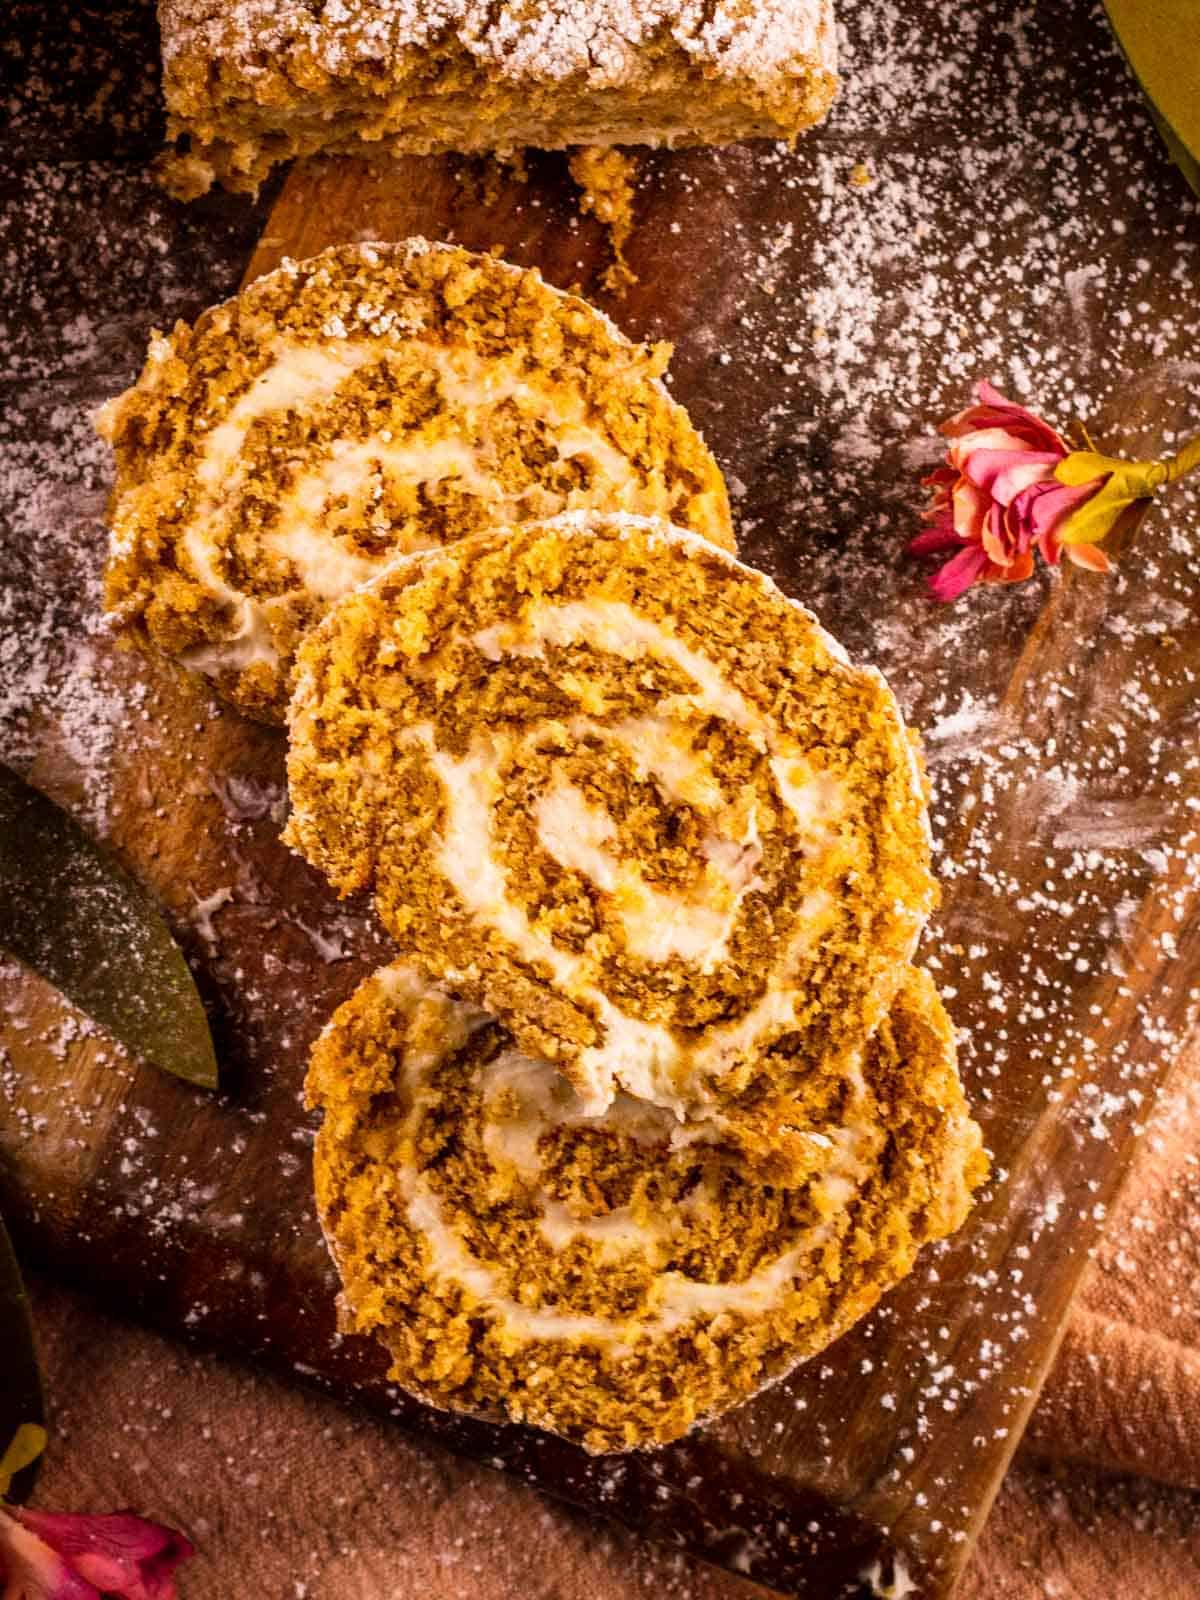 Slices of pumpkin roll cake on a wooden cutting board.